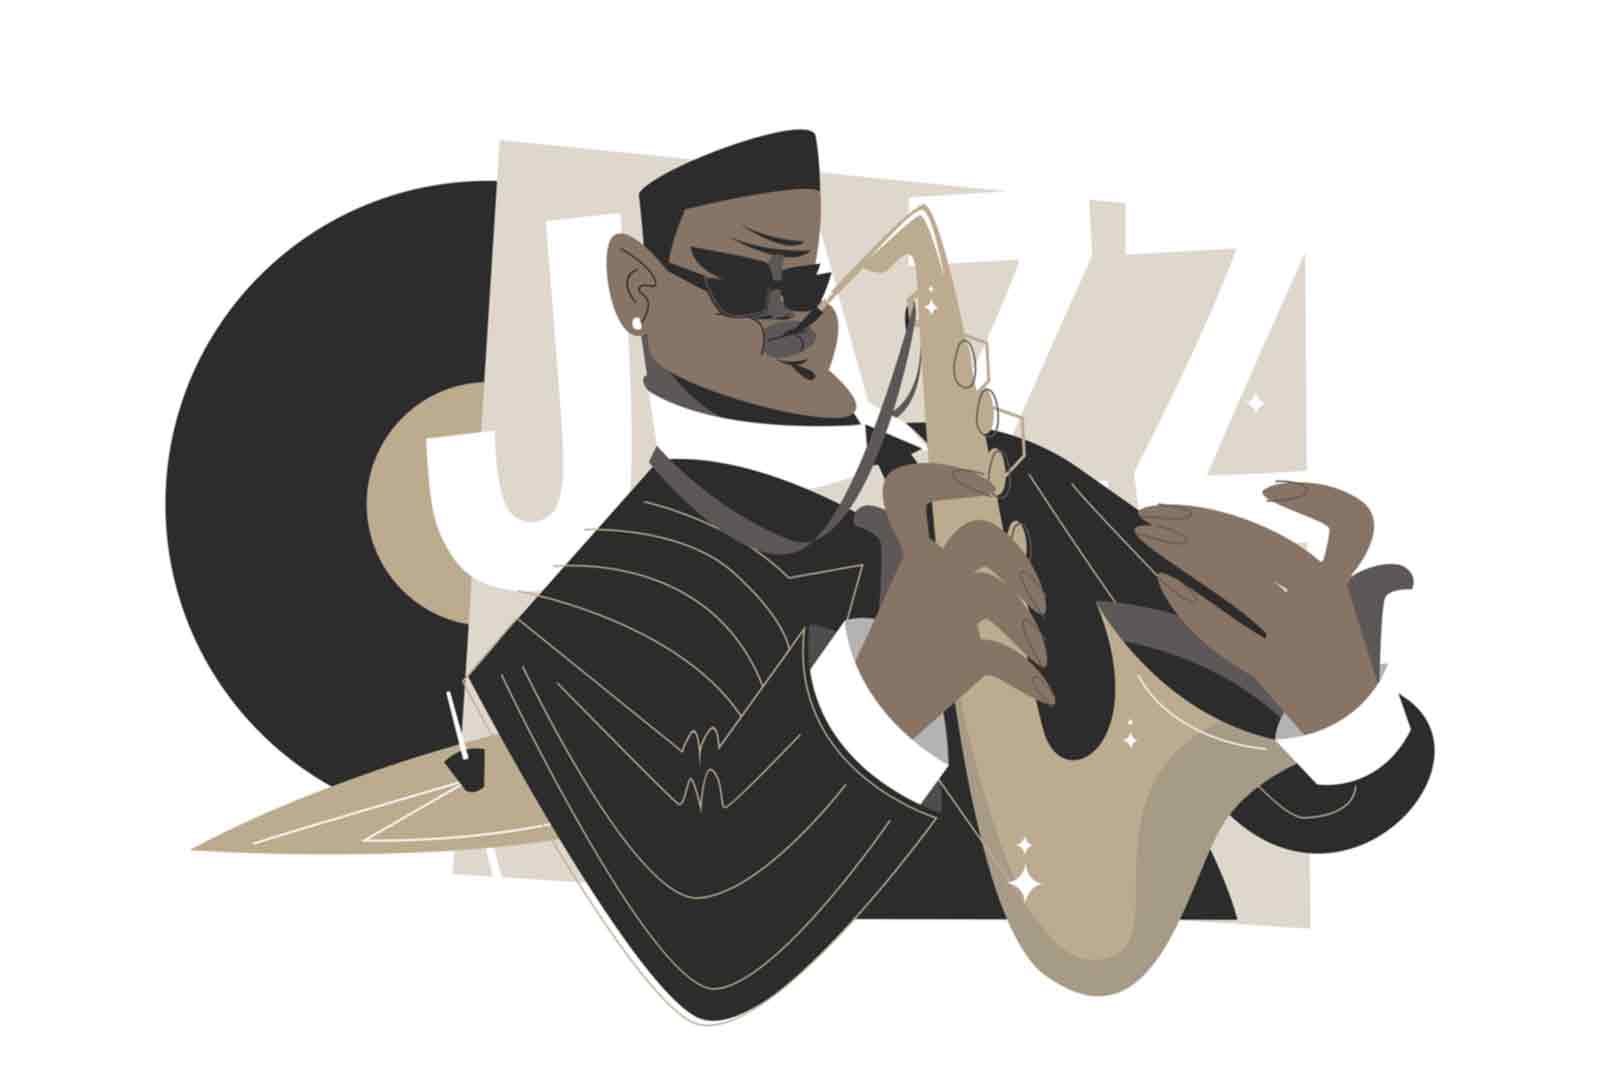 Jazz saxophone man player vector illustration. Classy jazzman in tuxedo playing on saxophone musical instrument flat style. Music, art and blues musician concept. Isolated on white background